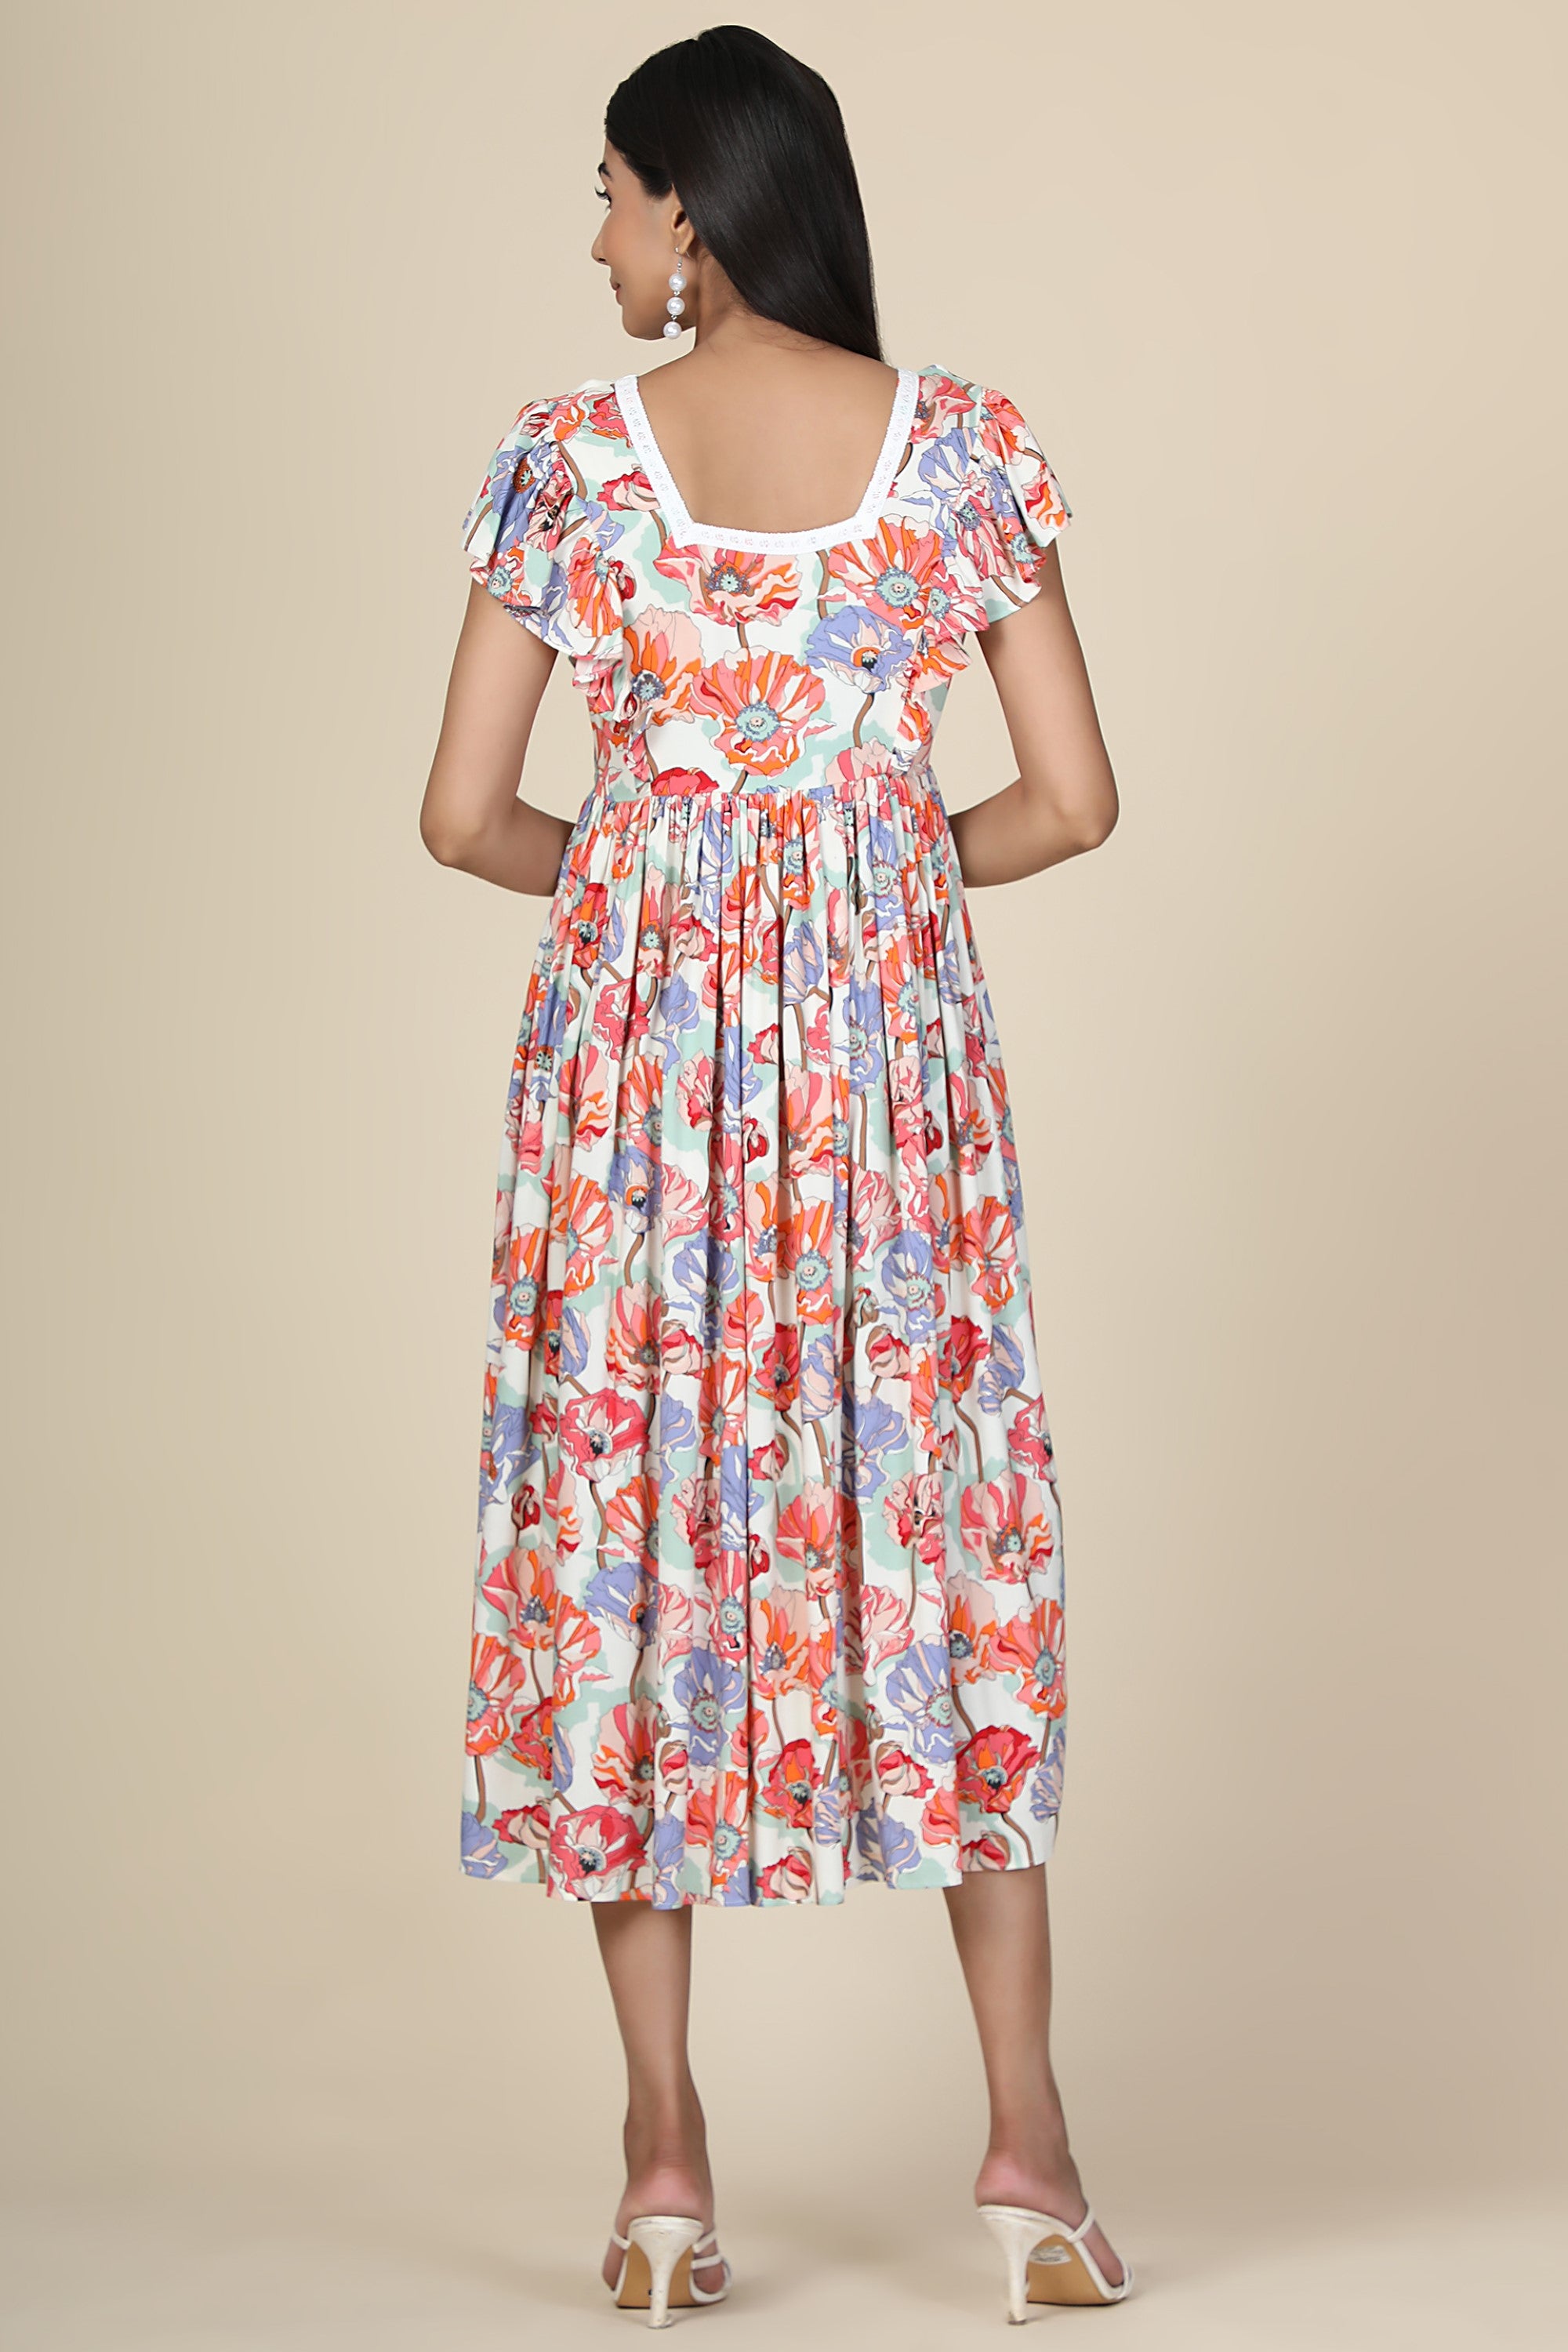 Women's Rayon Floral Dress With Ruffles At Yoke And Sleeves  - MIRACOLOS by Ruchi